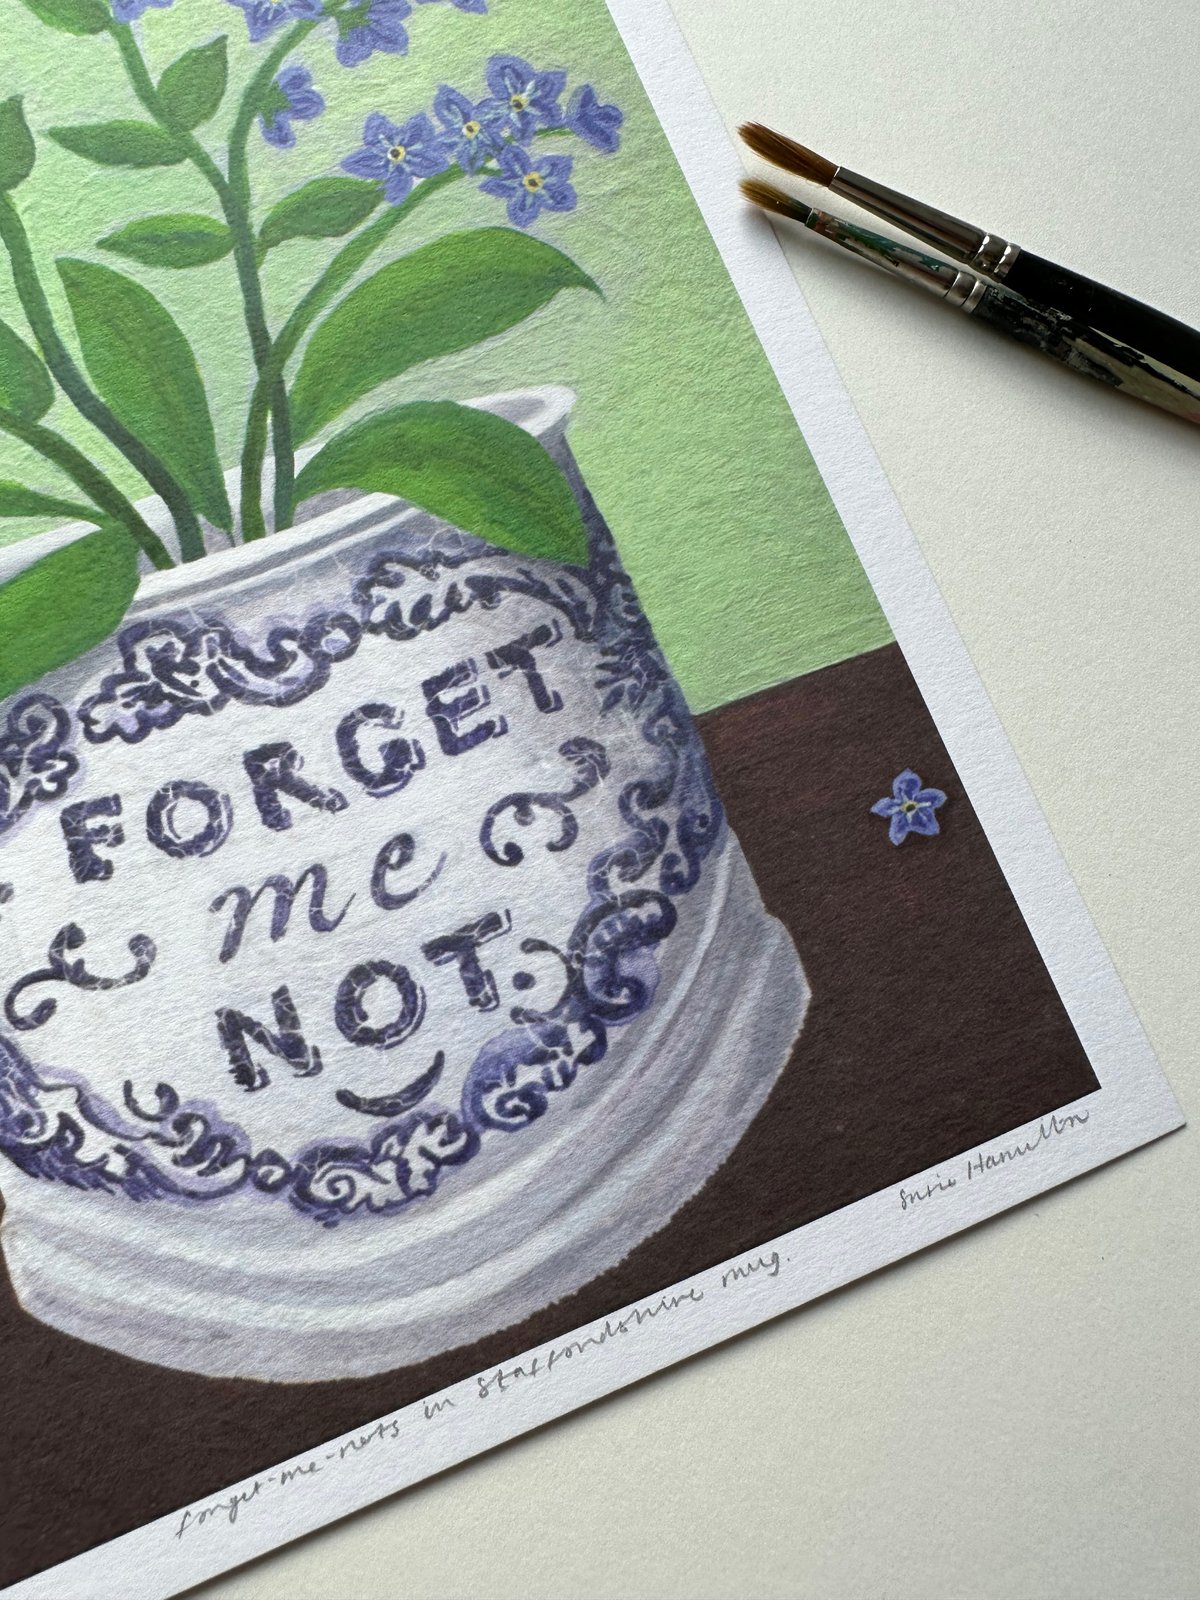 Forget-Me-Nots in Blue Cup Print & Card